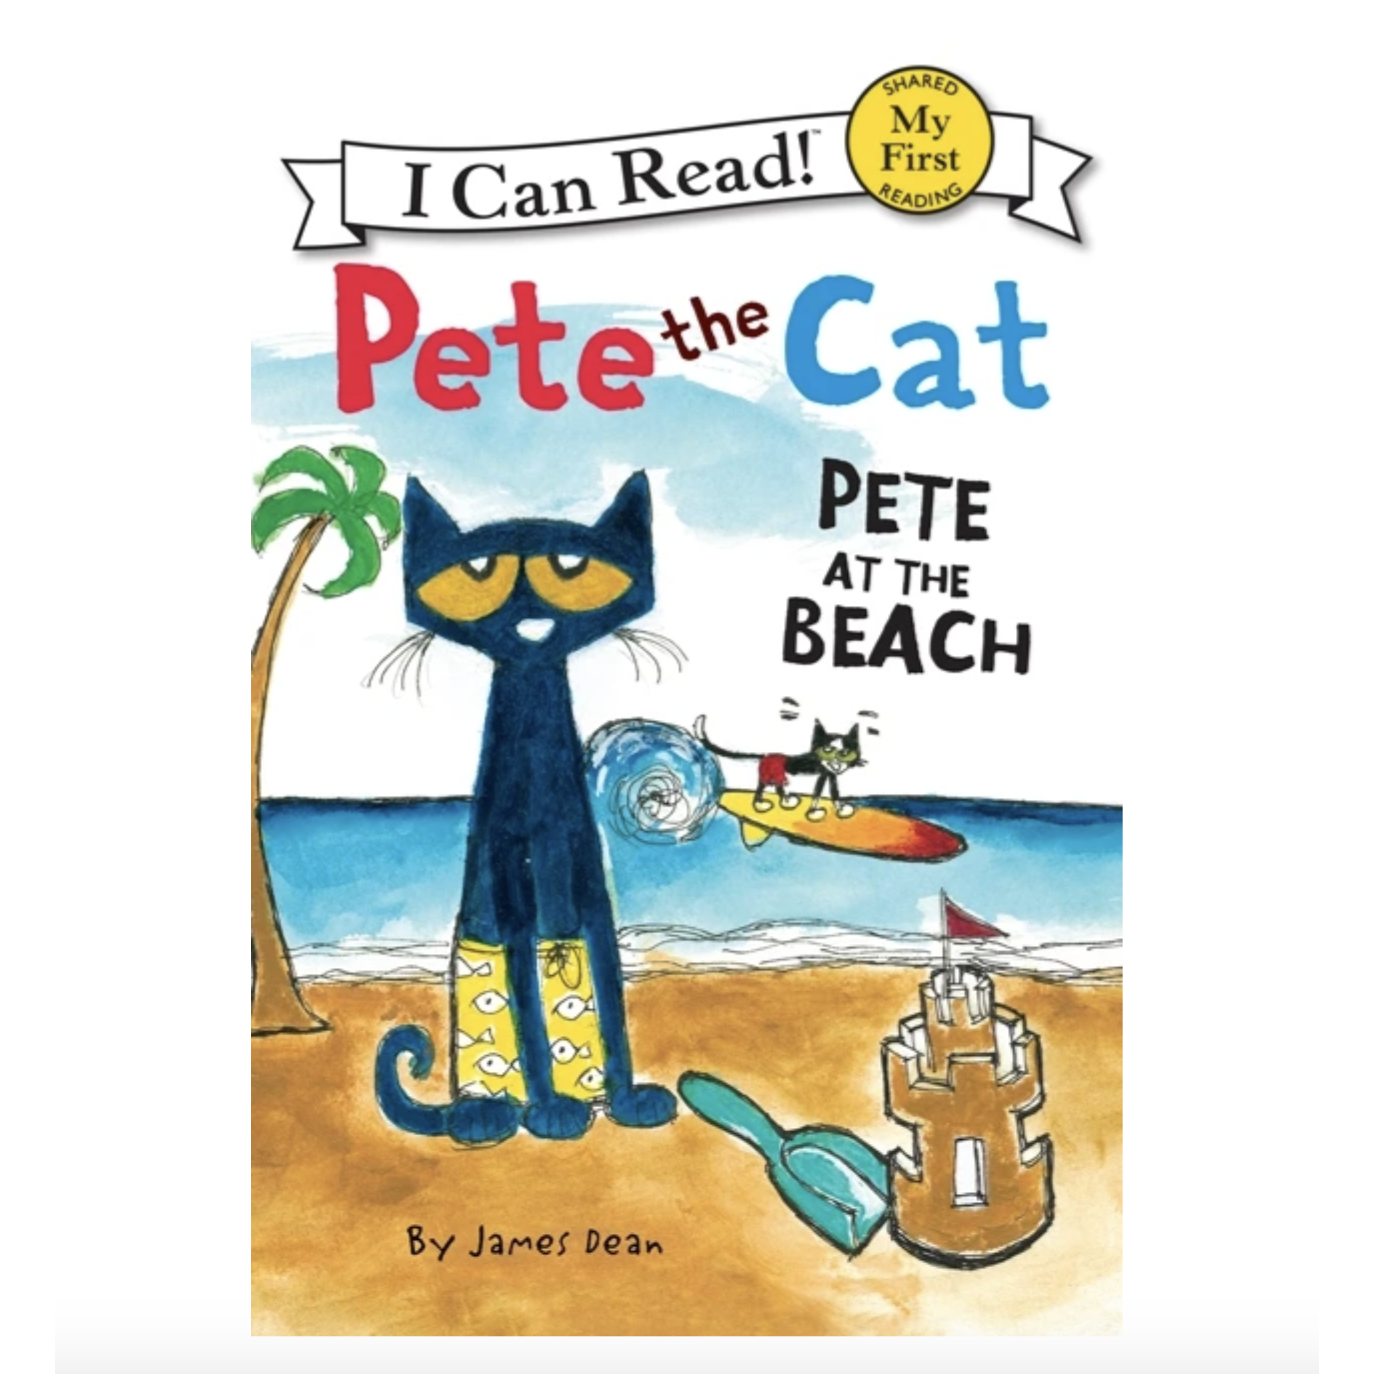 Harper Collins: My First I Can Read: Pete the Cat: Pete at the Beach-HARPER COLLINS PUBLISHERS-Little Giant Kidz